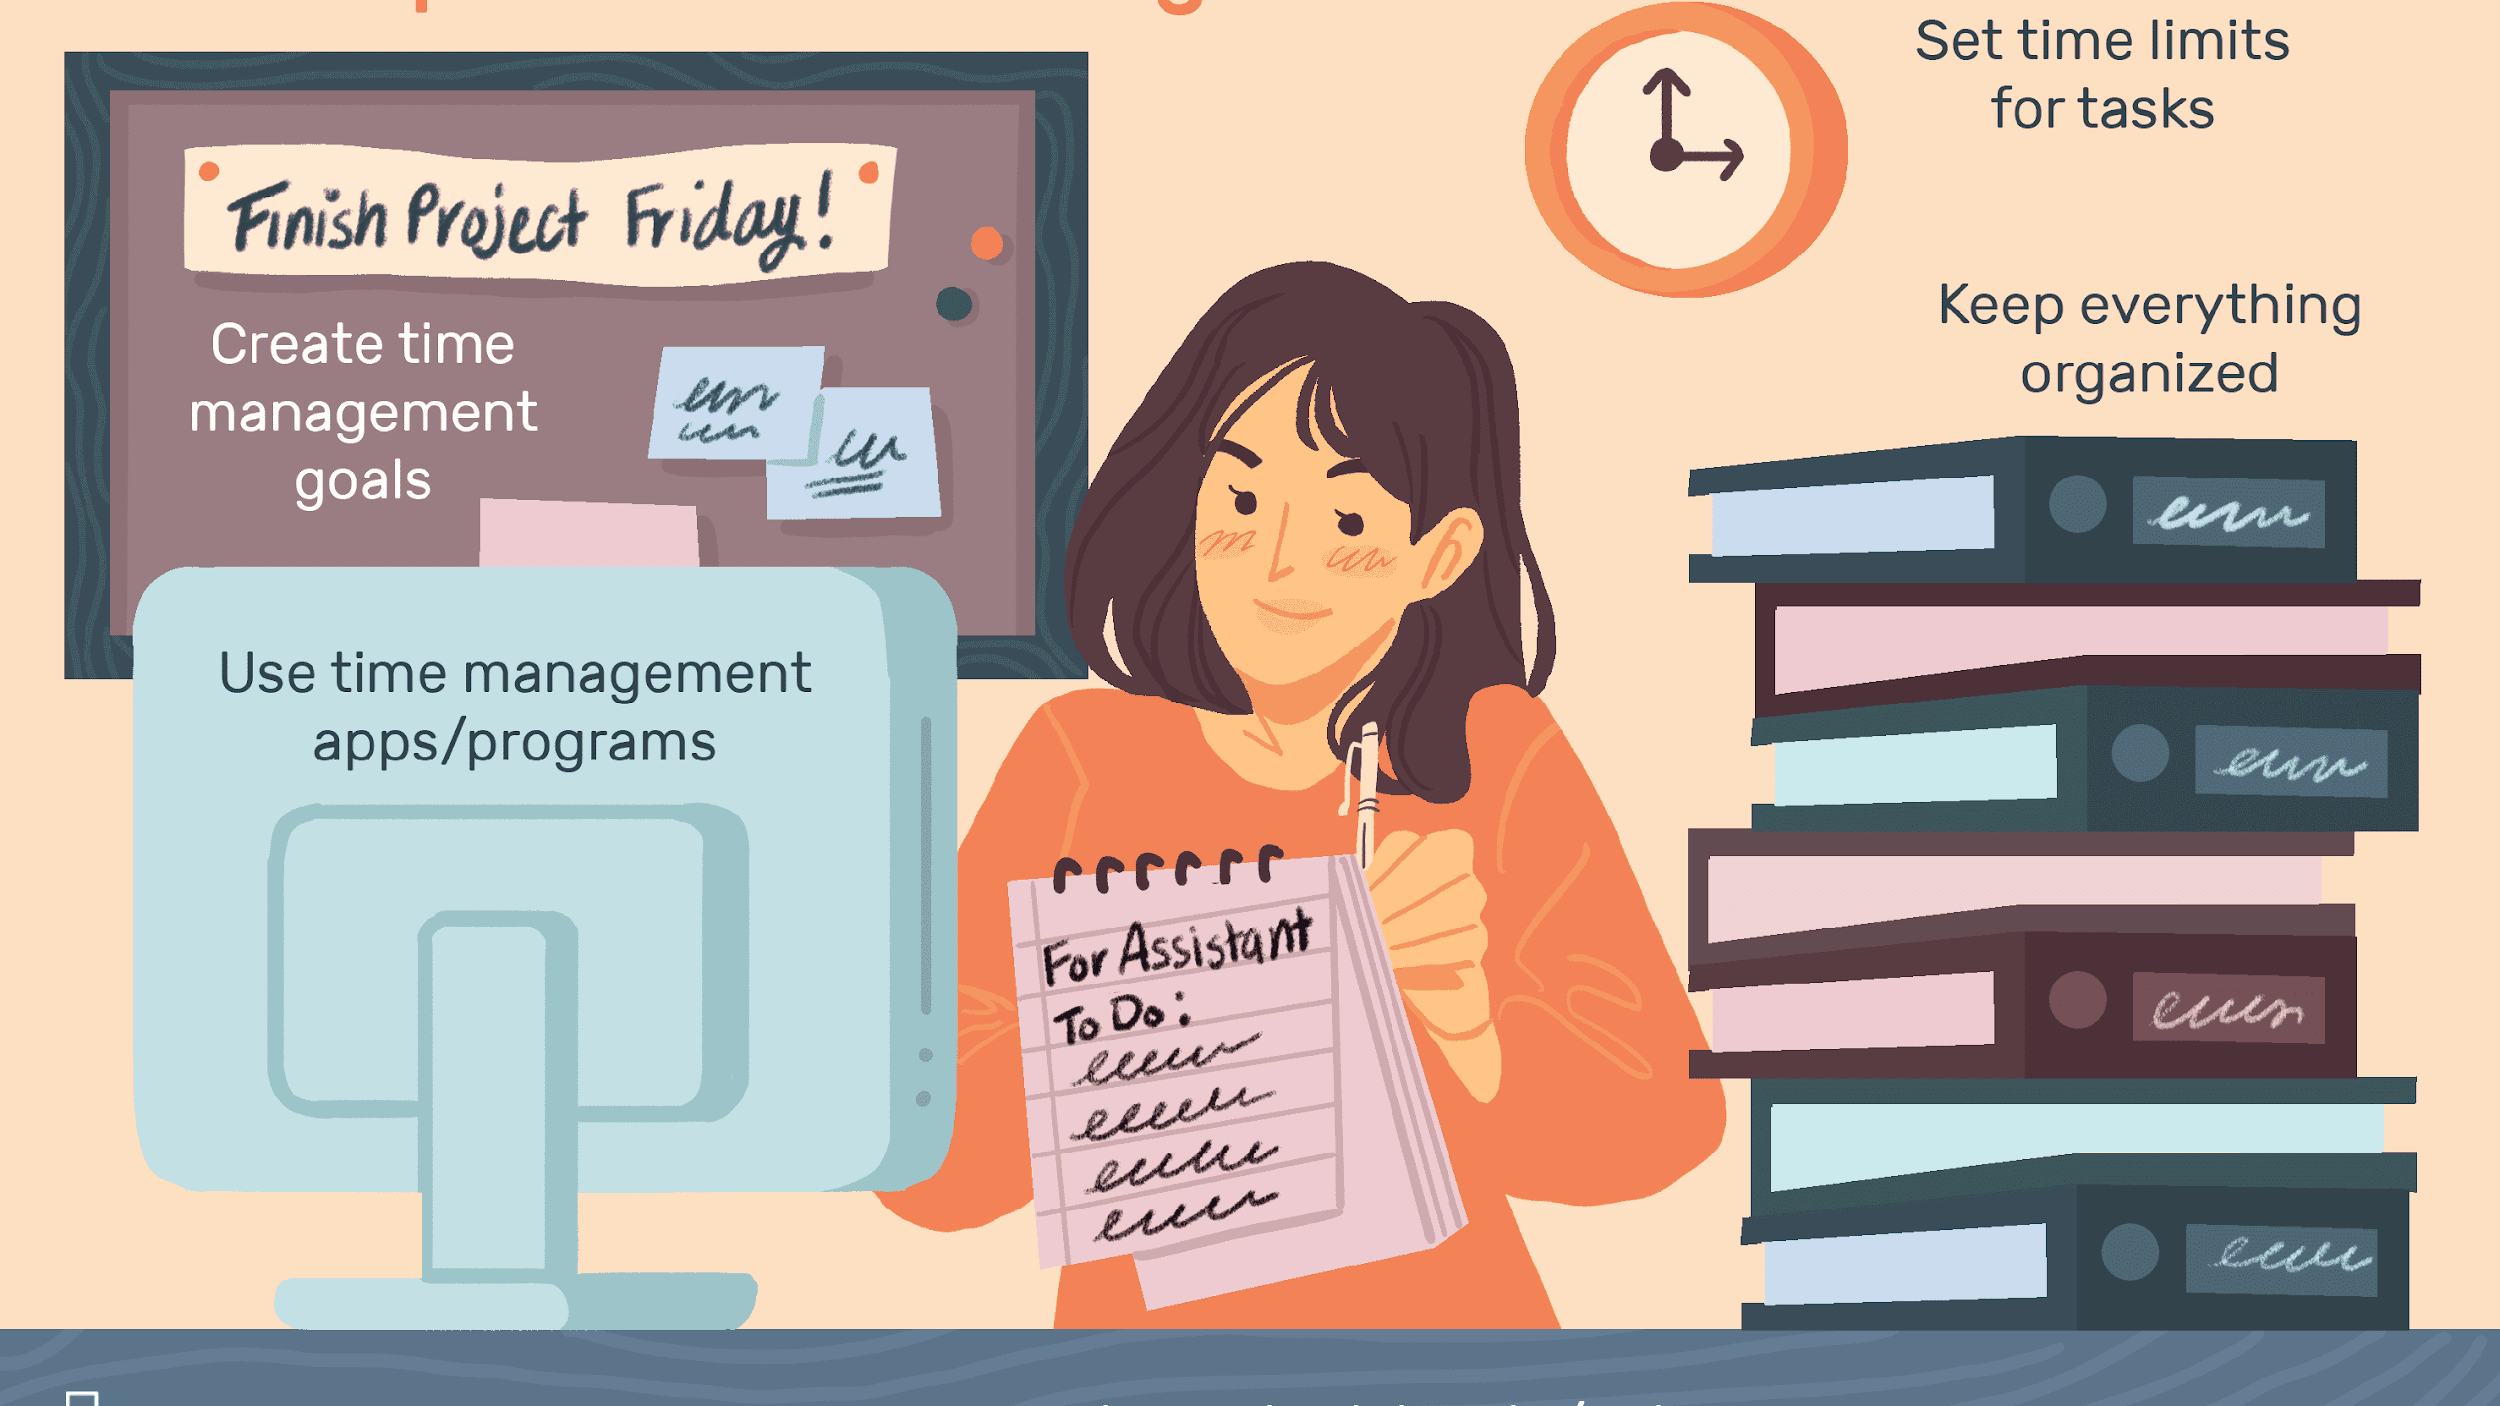 Illustration of person with a to-do list and stack of books